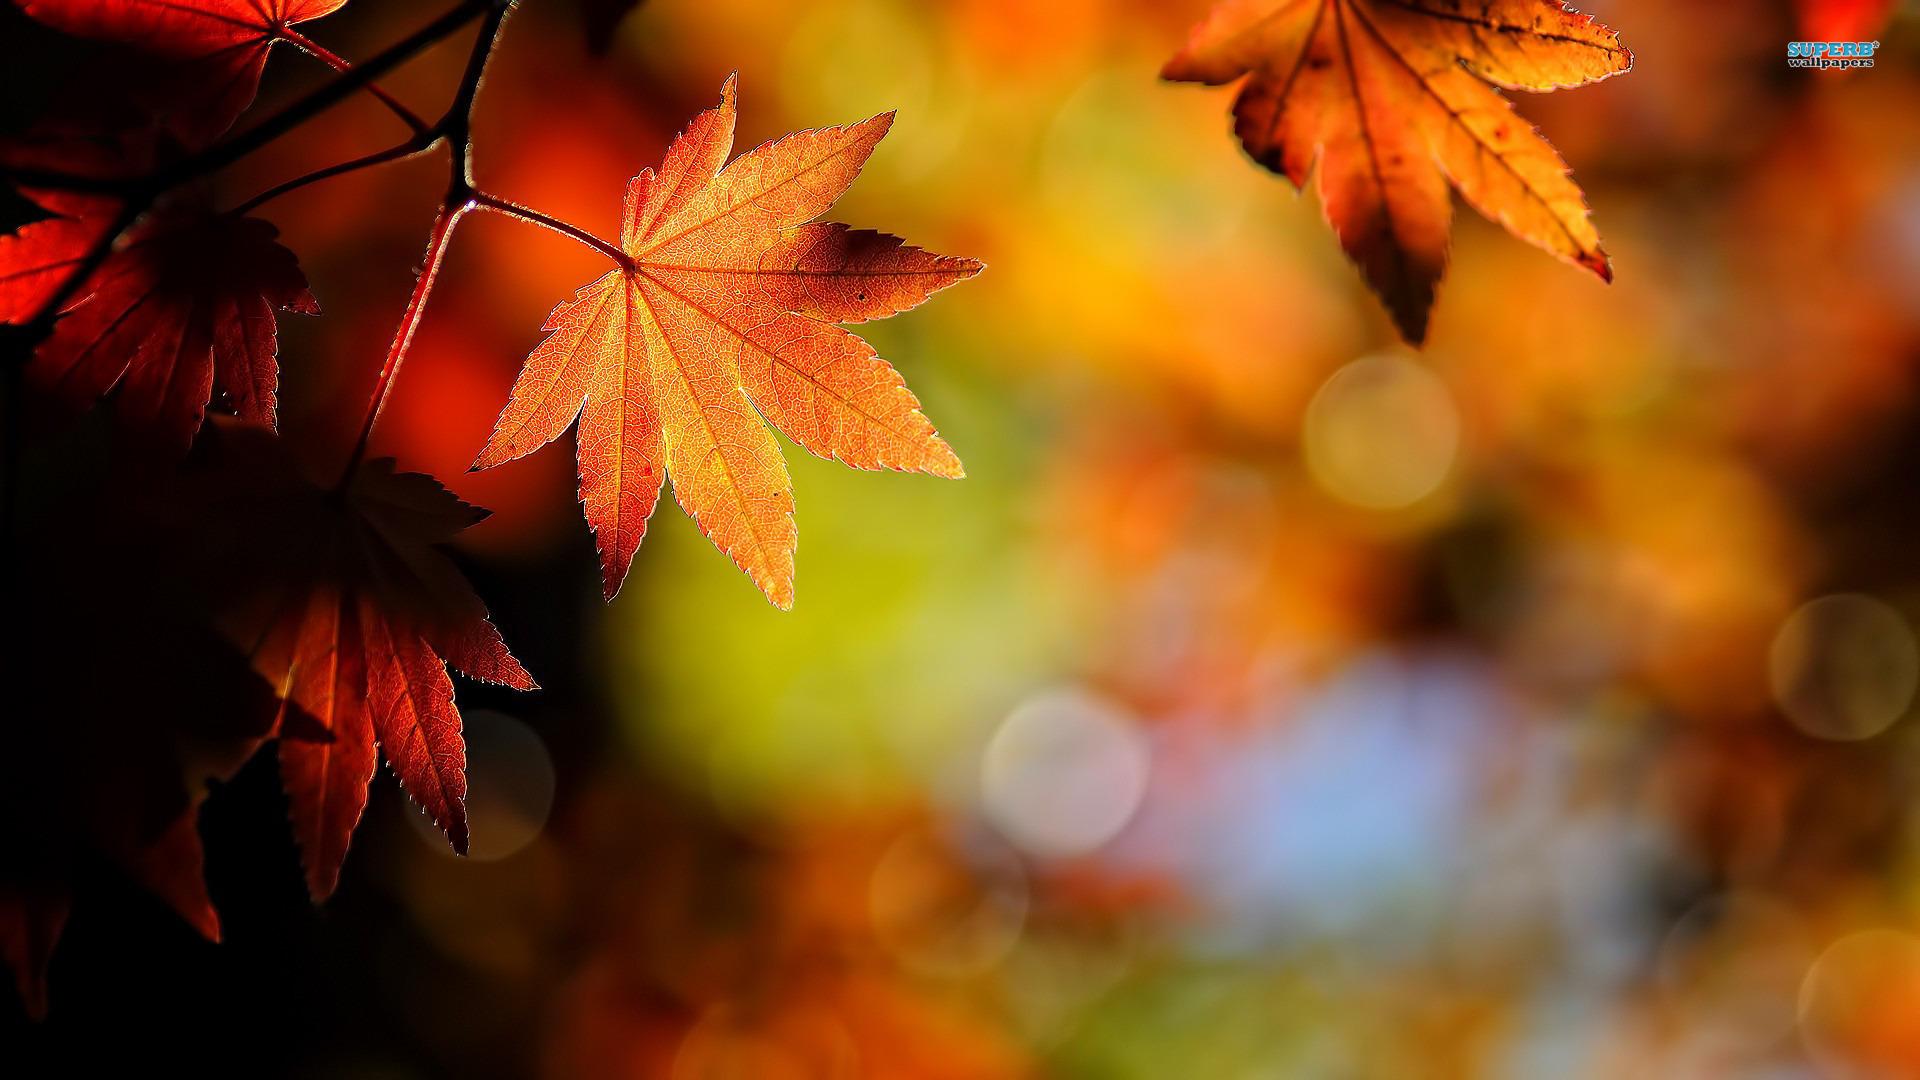 Autumn Leaves - Hd Wallpaper Autumn Leaves , HD Wallpaper & Backgrounds